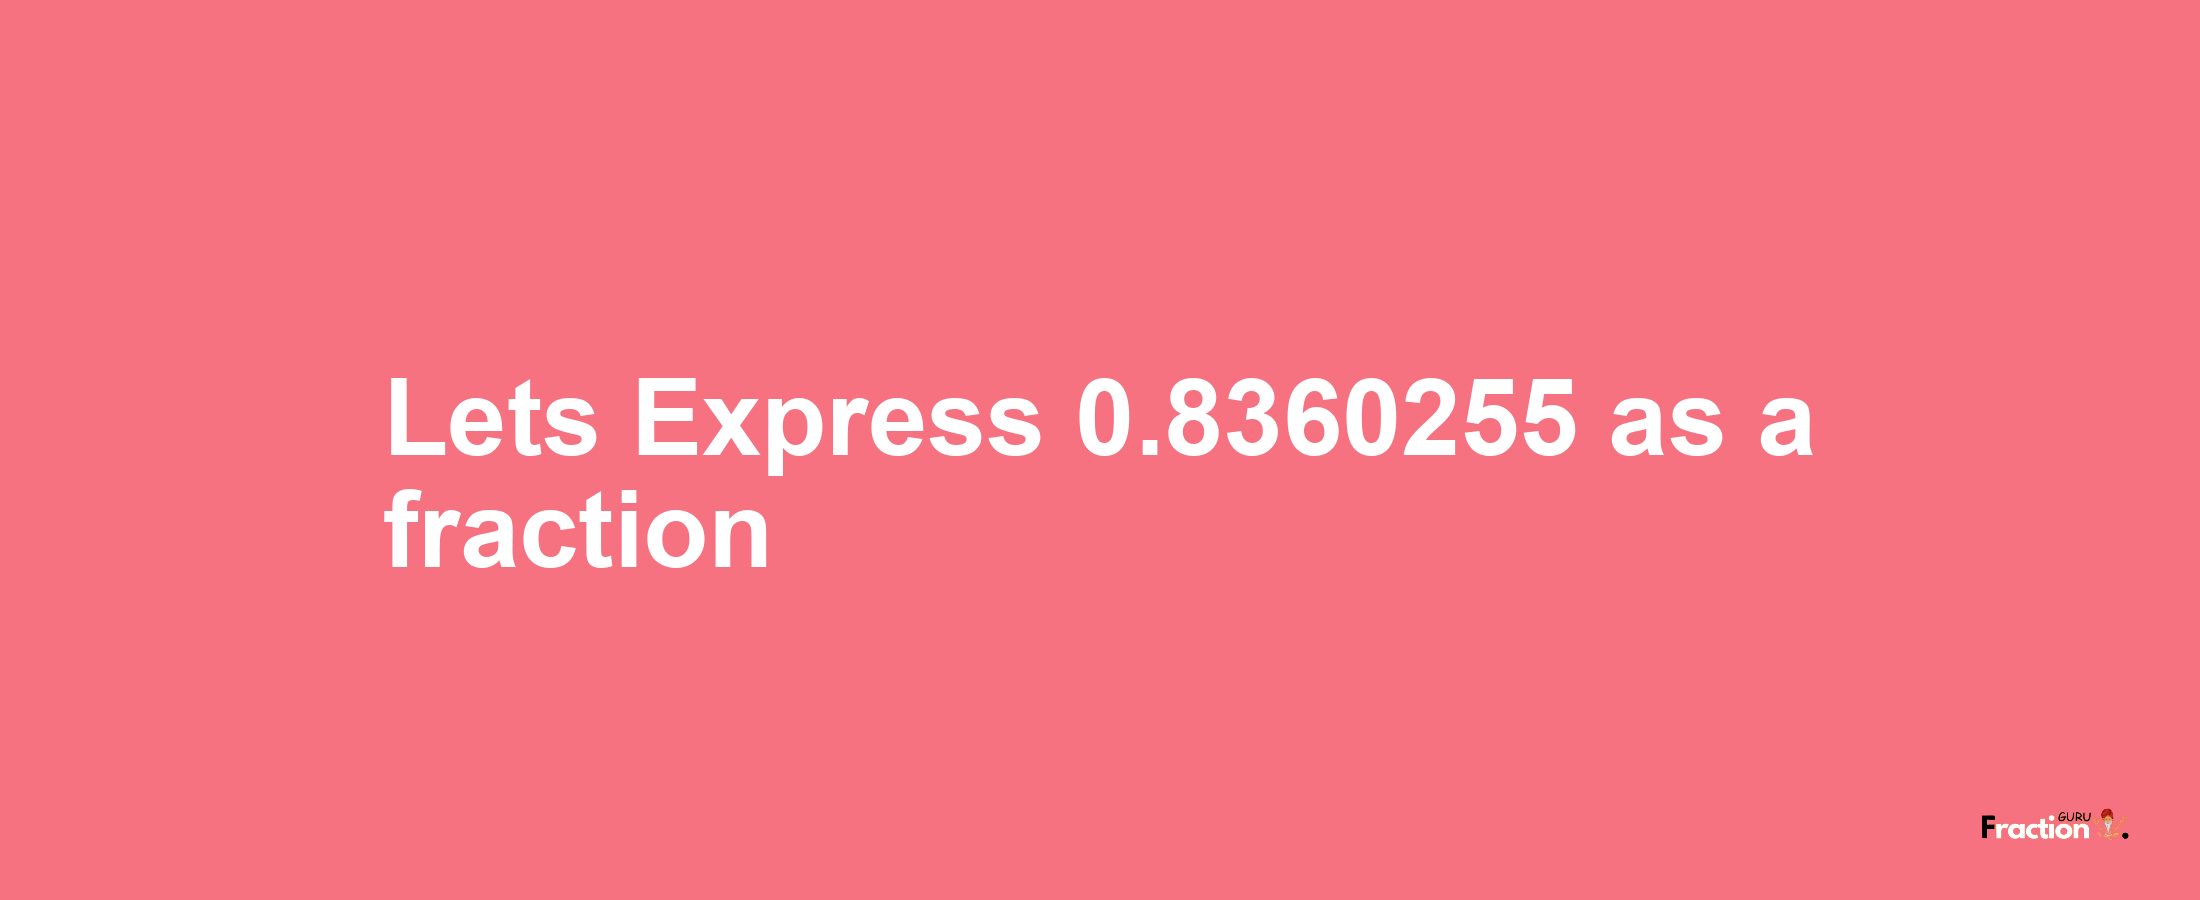 Lets Express 0.8360255 as afraction